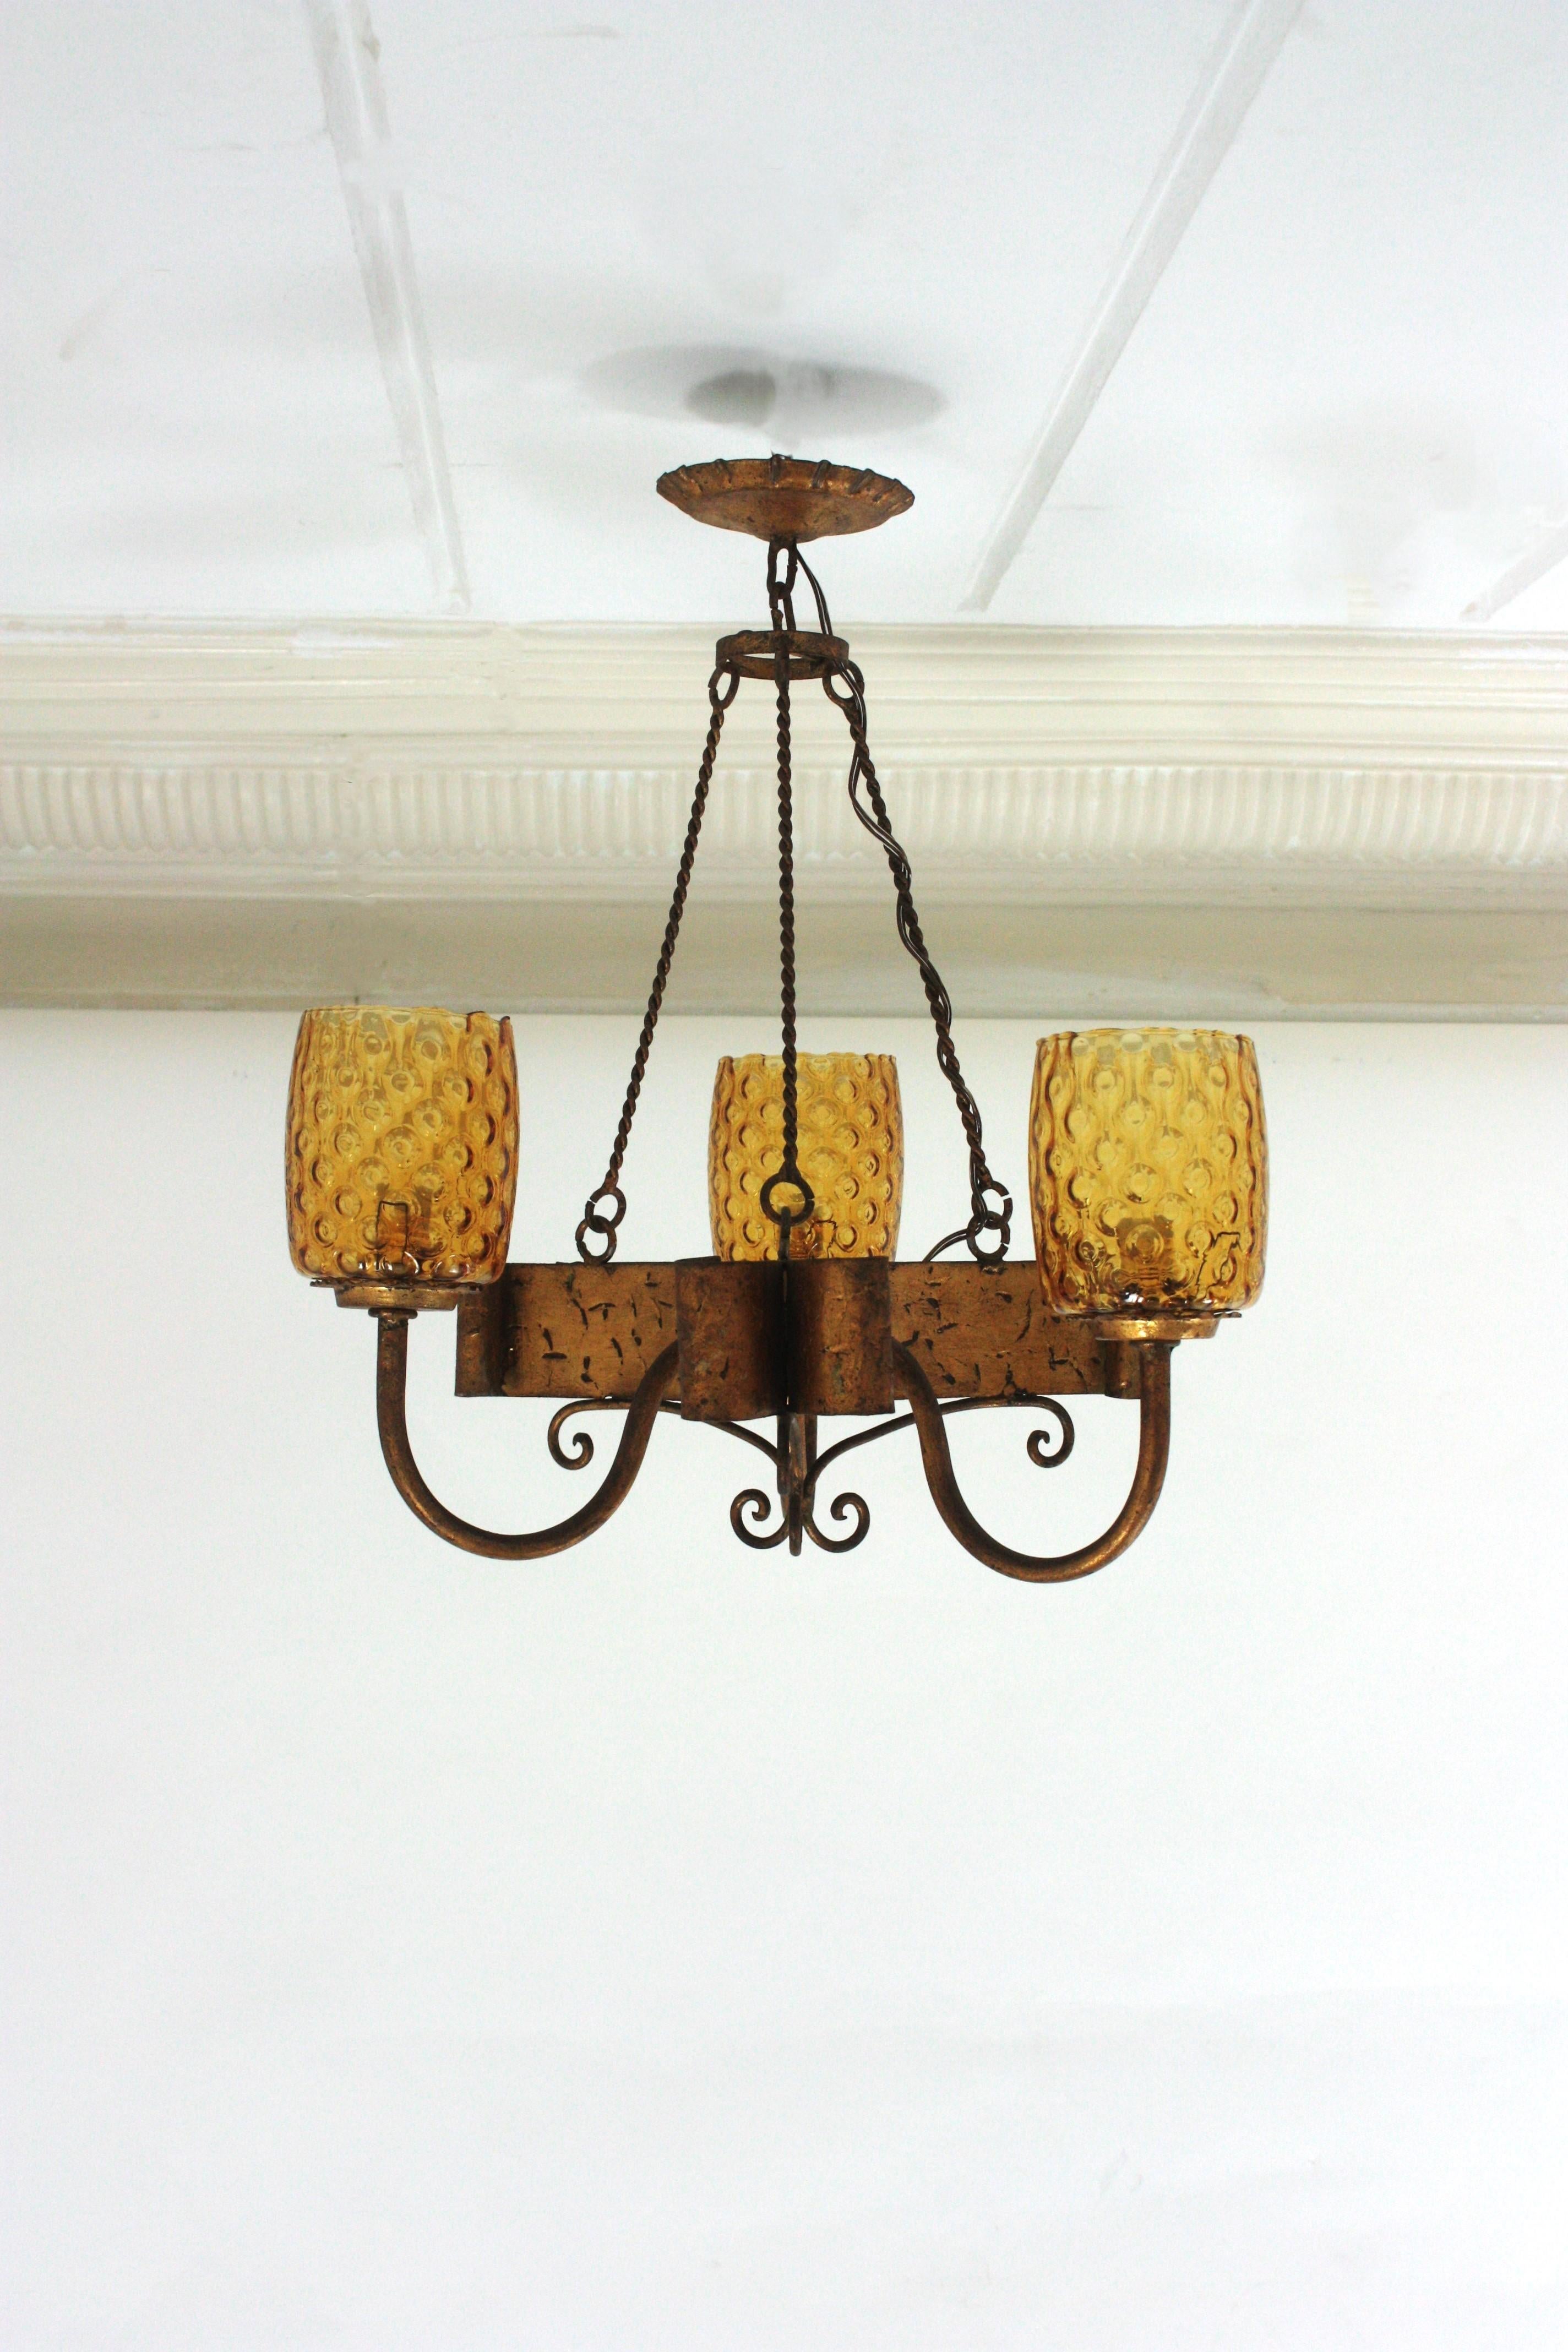 Hand Forged Gilt Iron and Amber Glass Spanish Chandelier
Hand forged iron three-light pendant or ceiling hanging light with amber lampshades, Spain, 1930s-1940s.
This eye-catching chandelier features a wrought iron structure with three arms holding